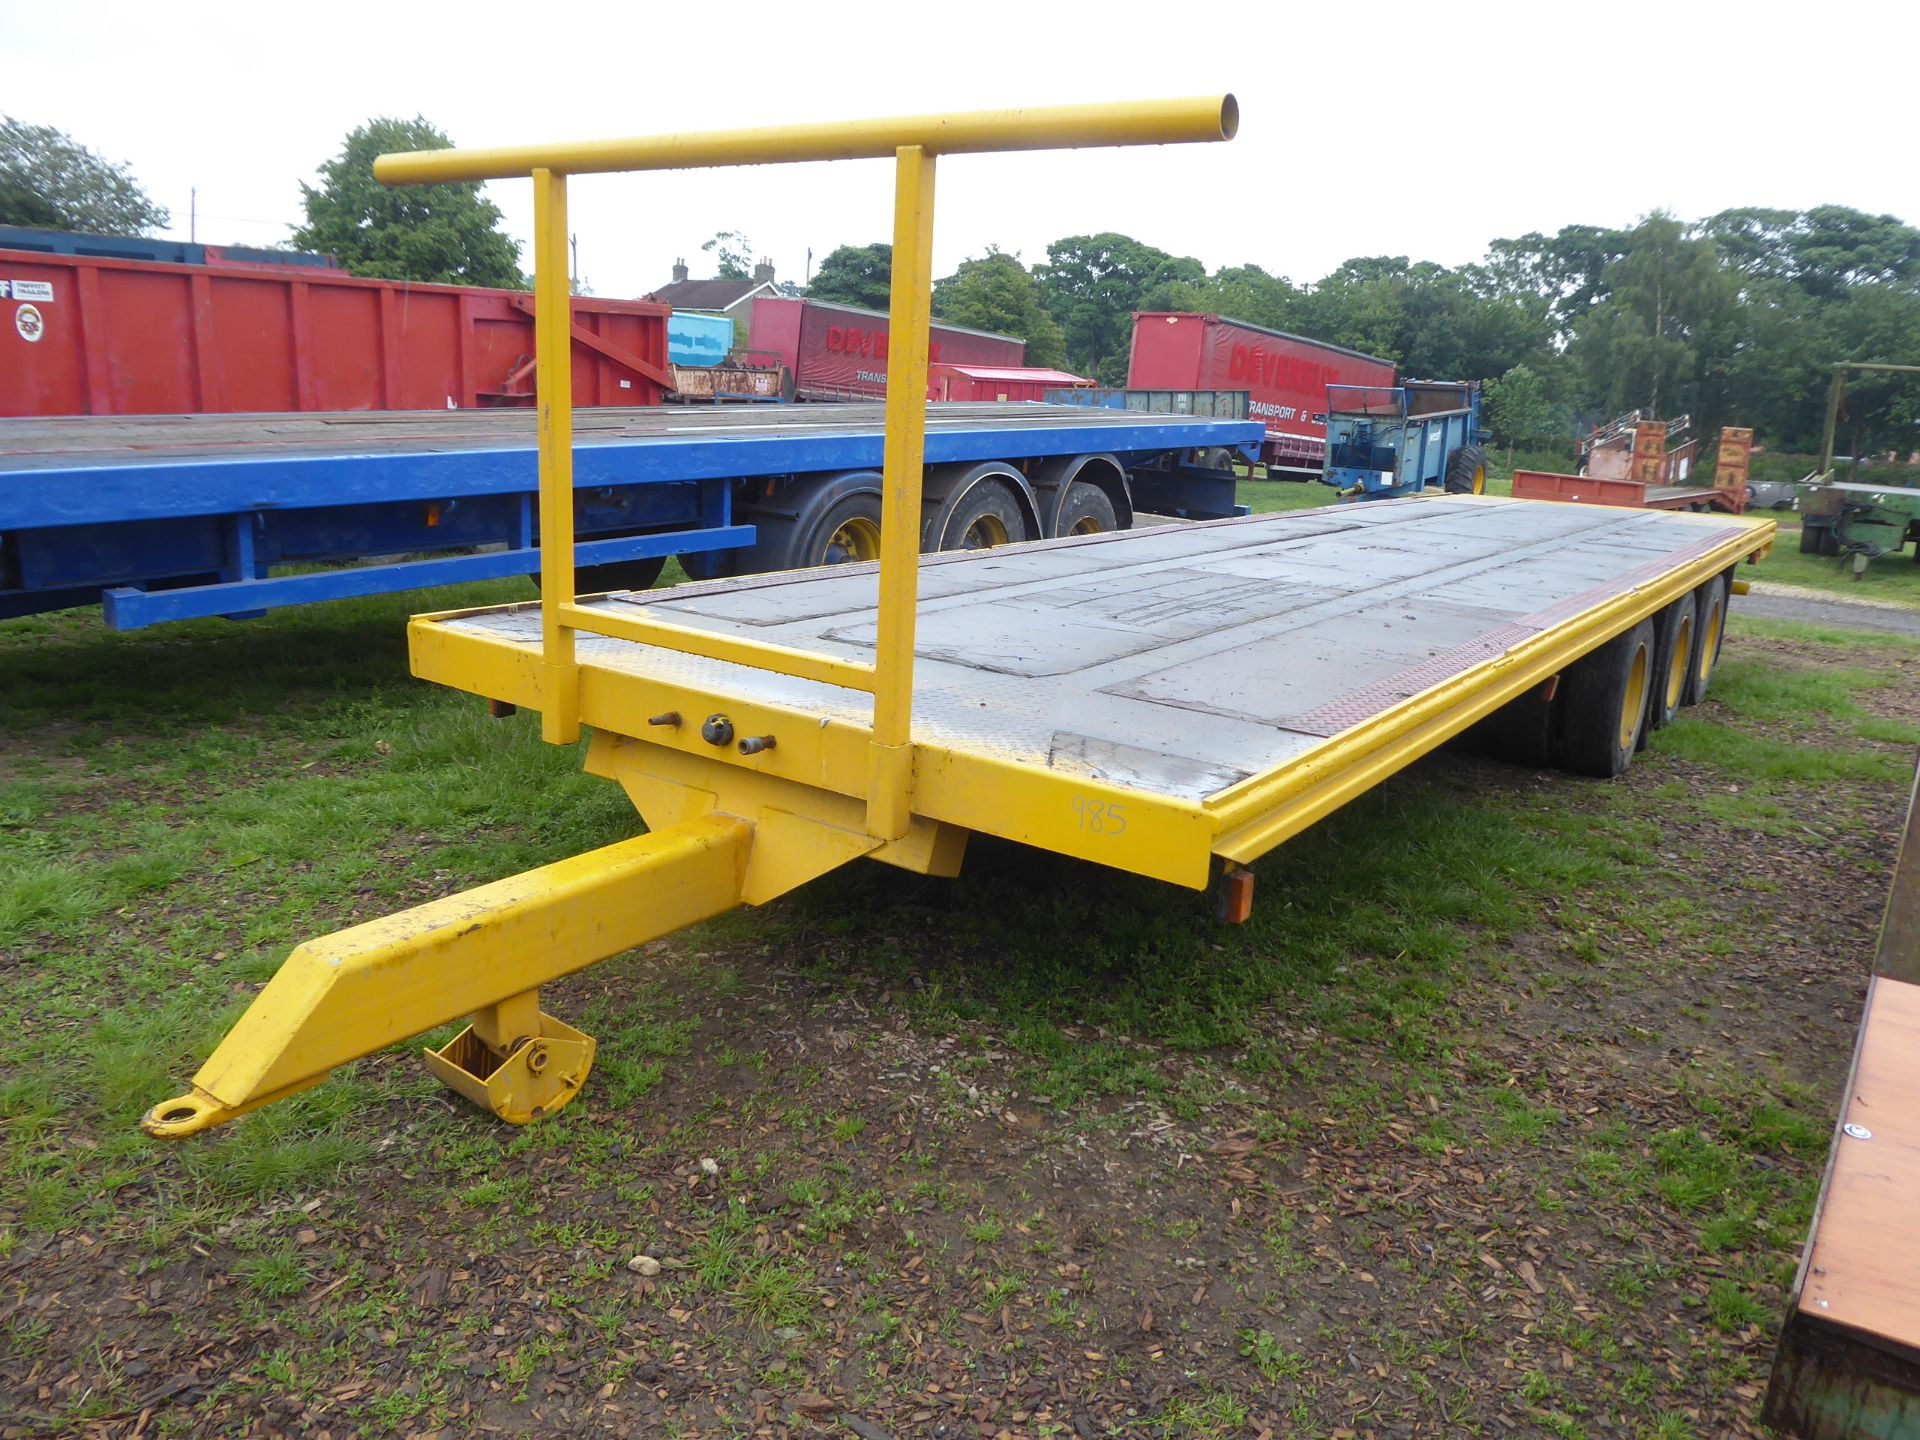 34ft flat trailer, converted to drawbar with tractor towing eye, low ride height, 19" wheels, tri-